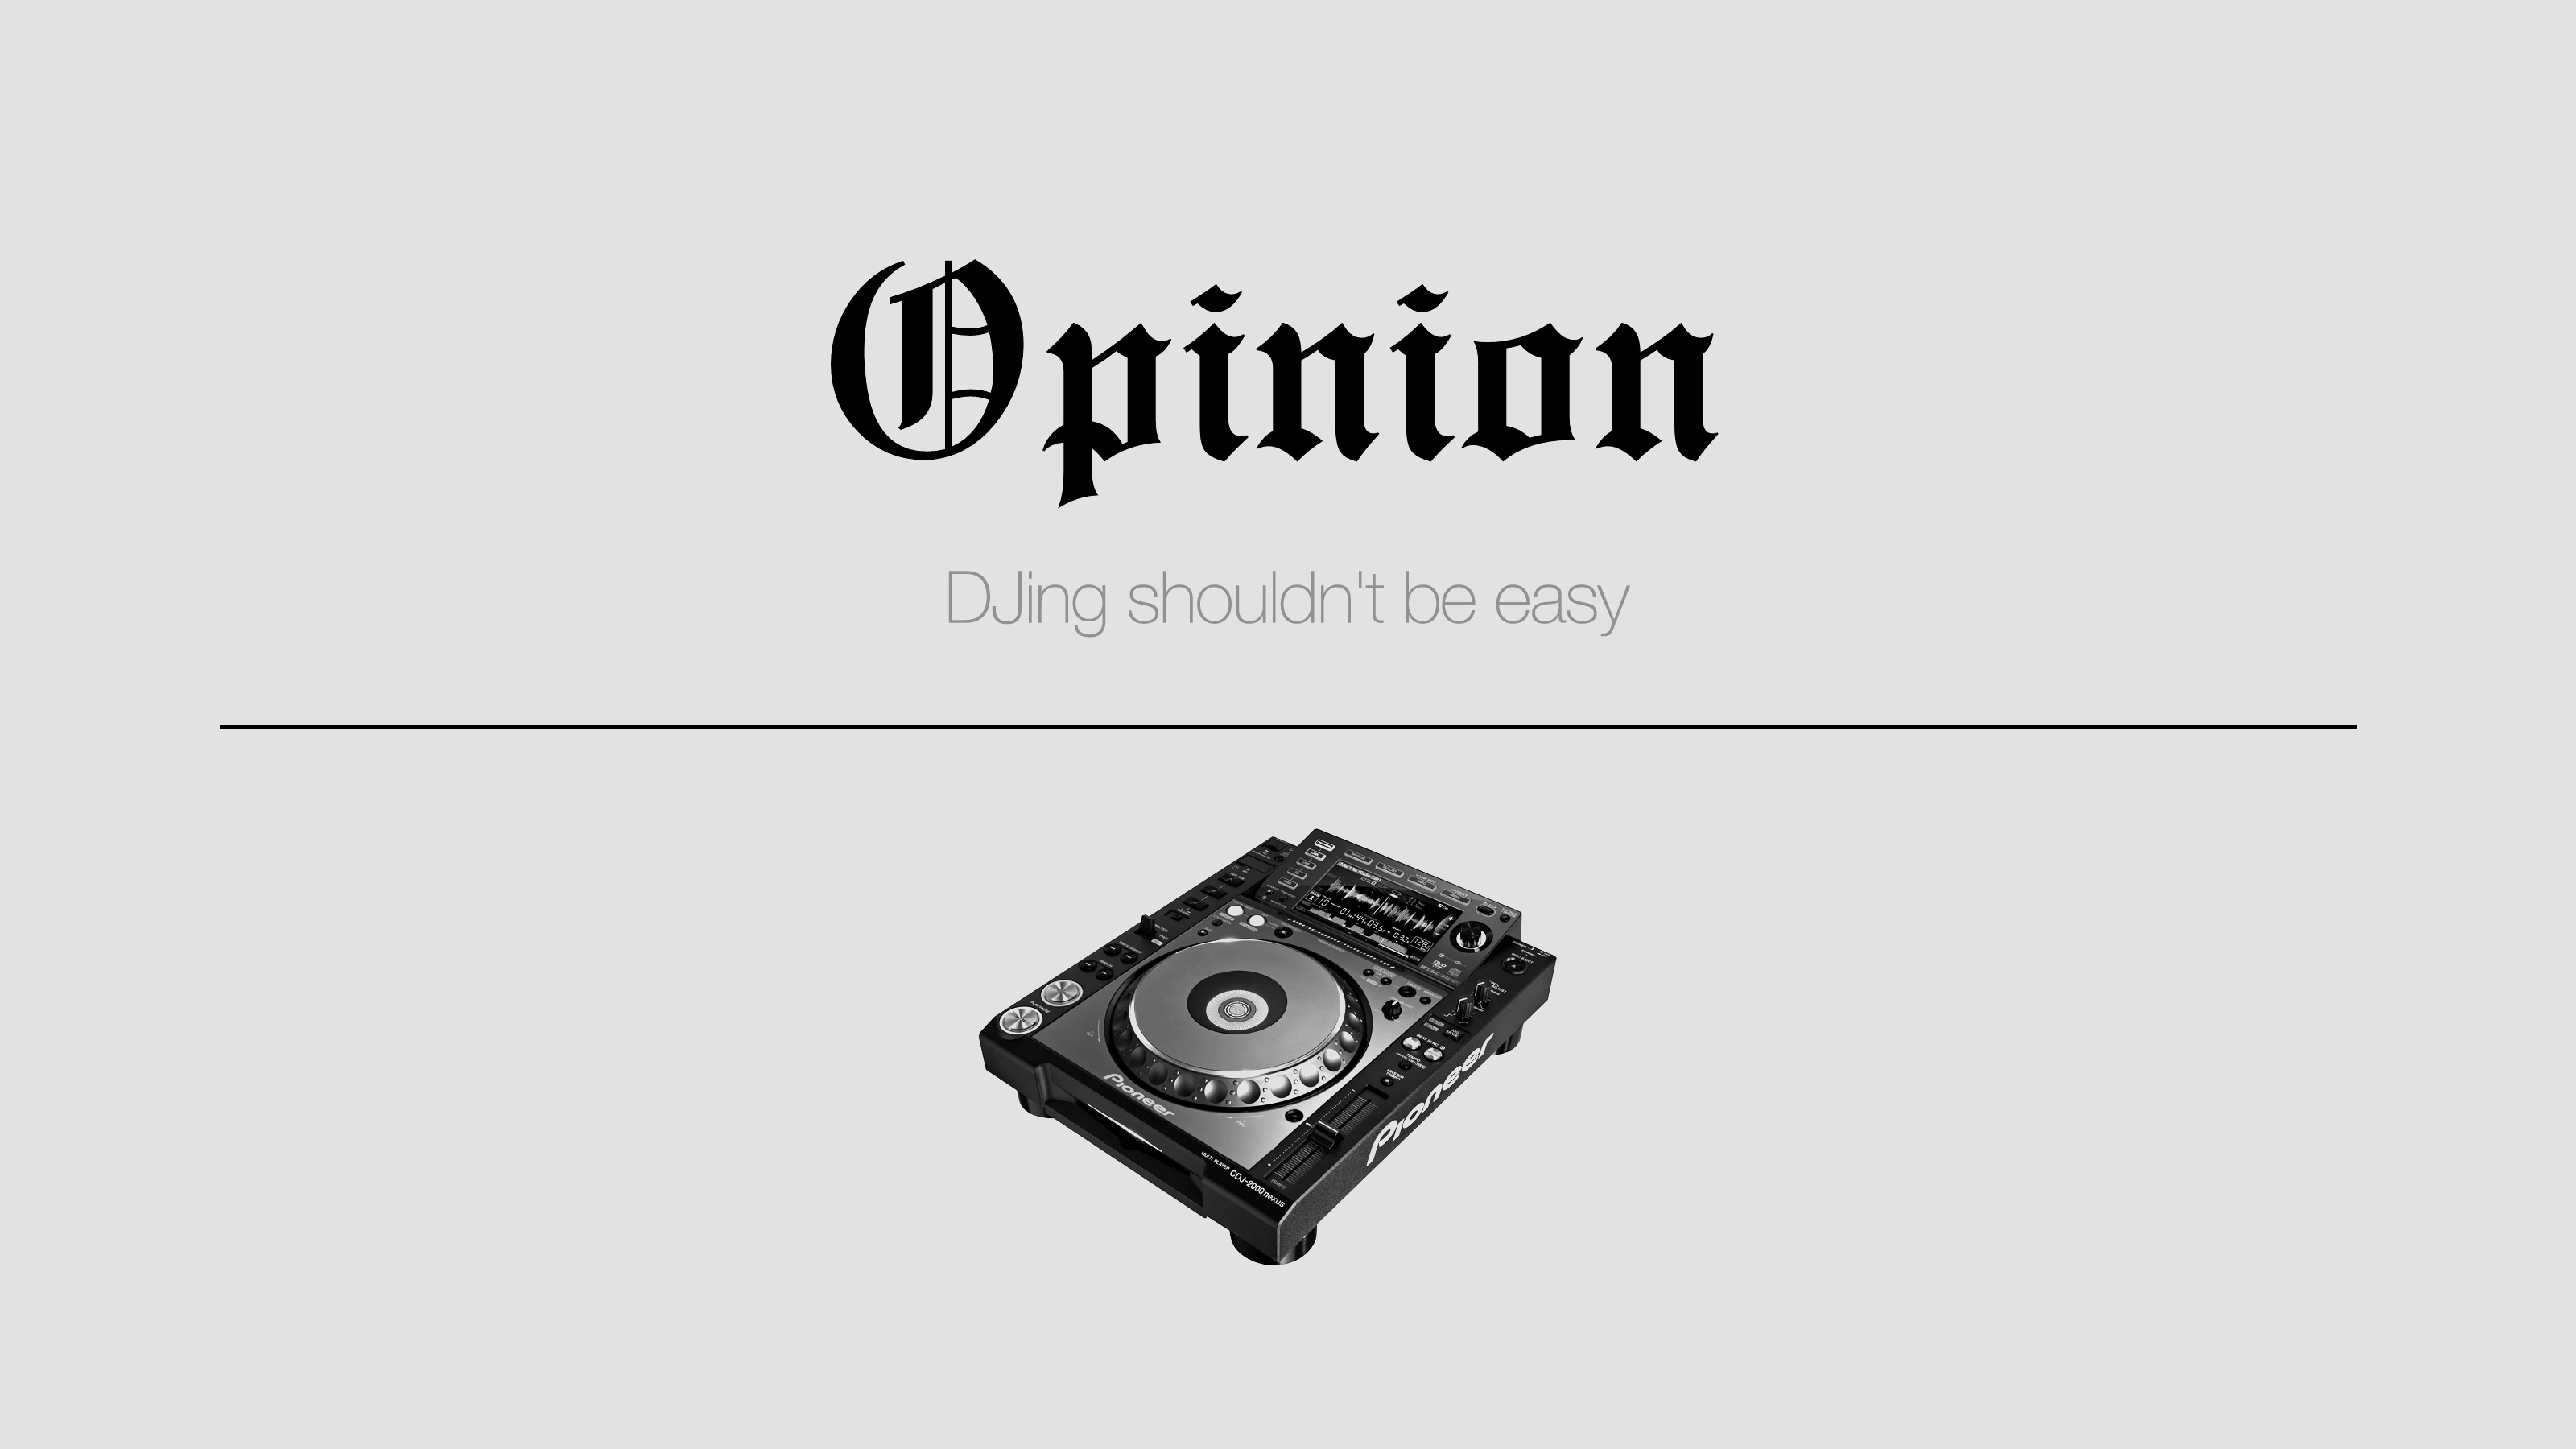 Opinion: DJing shouldn't be easy